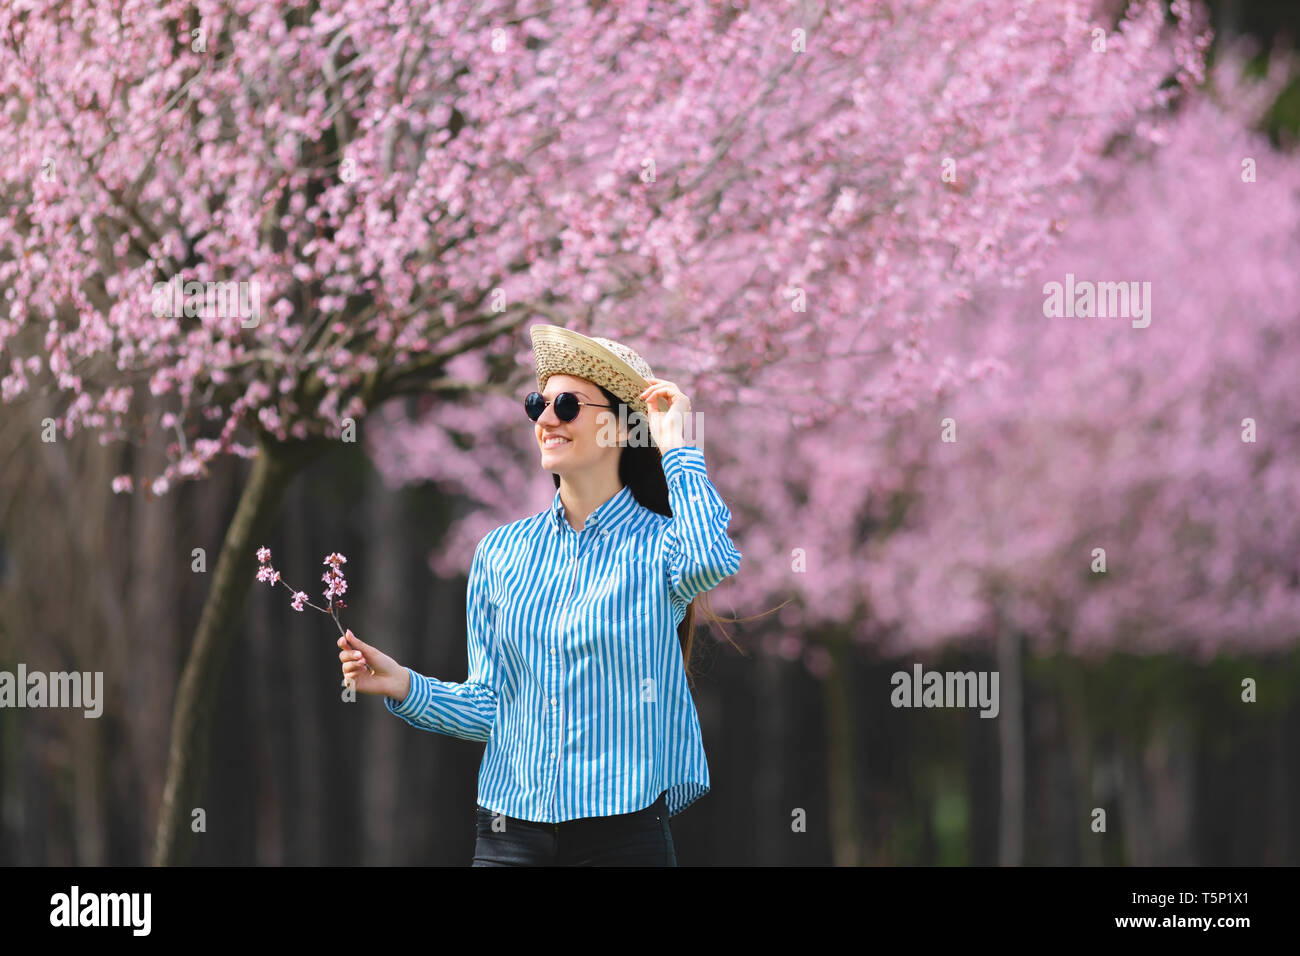 beautiful young woman in blooming cherry blossoms garden Stock Photo